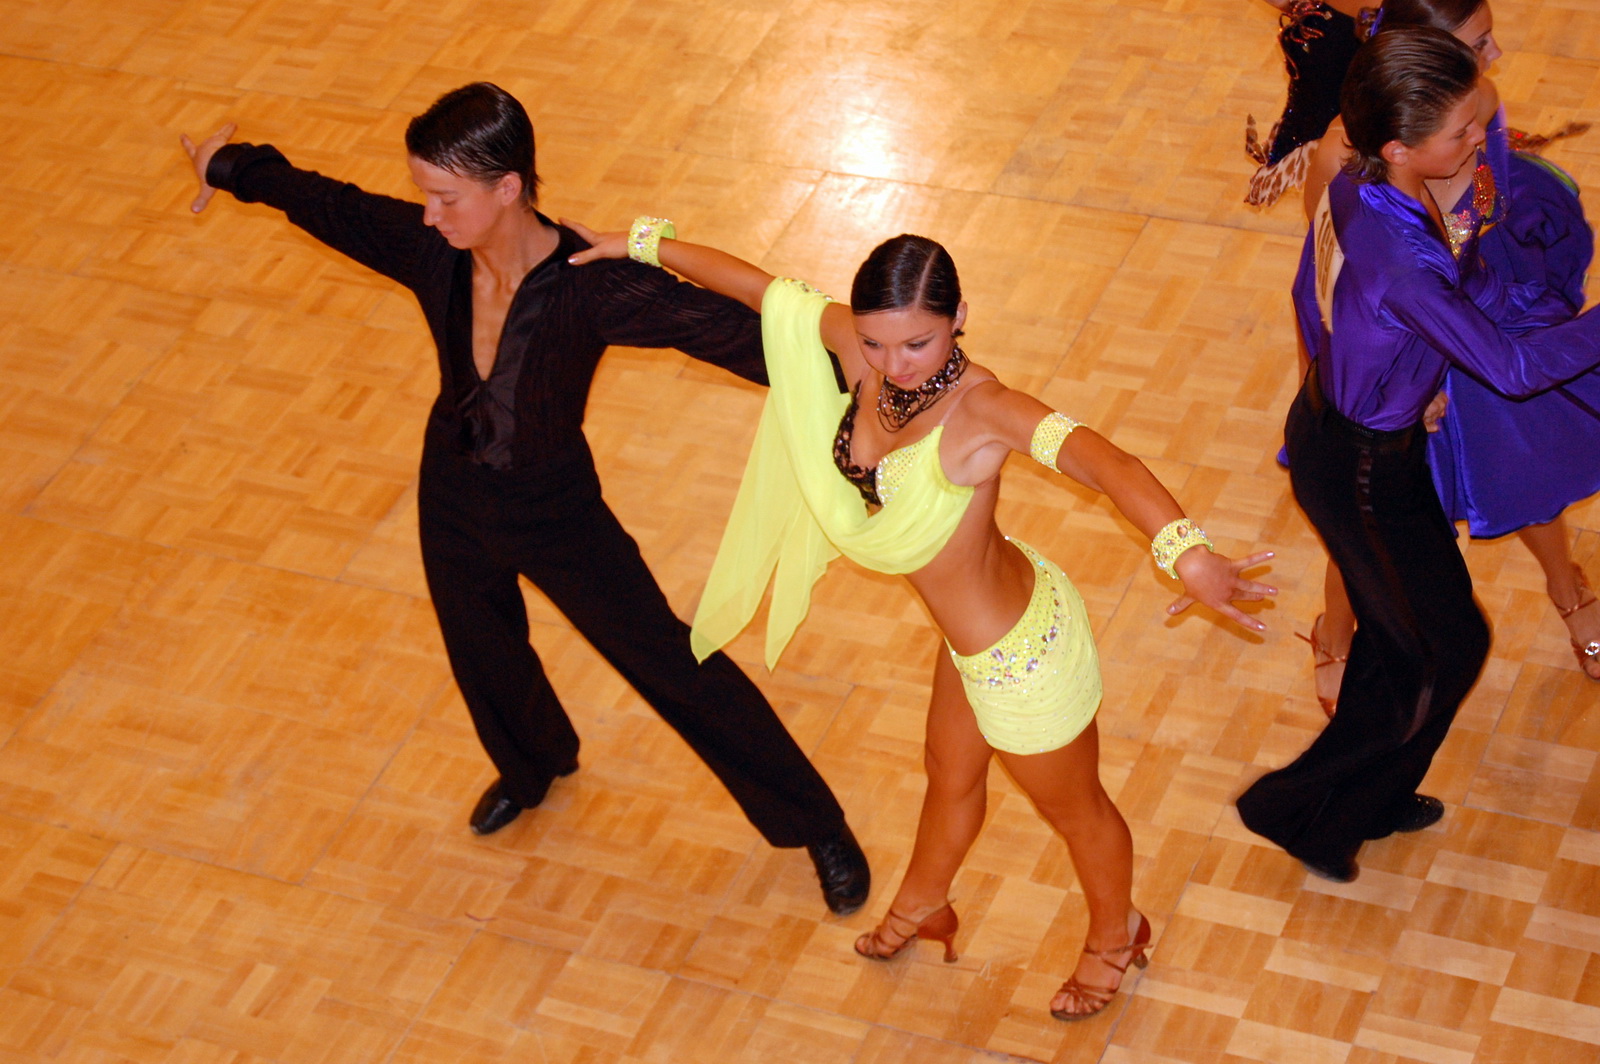 two dancers are performing on the dance floor in bright yellow